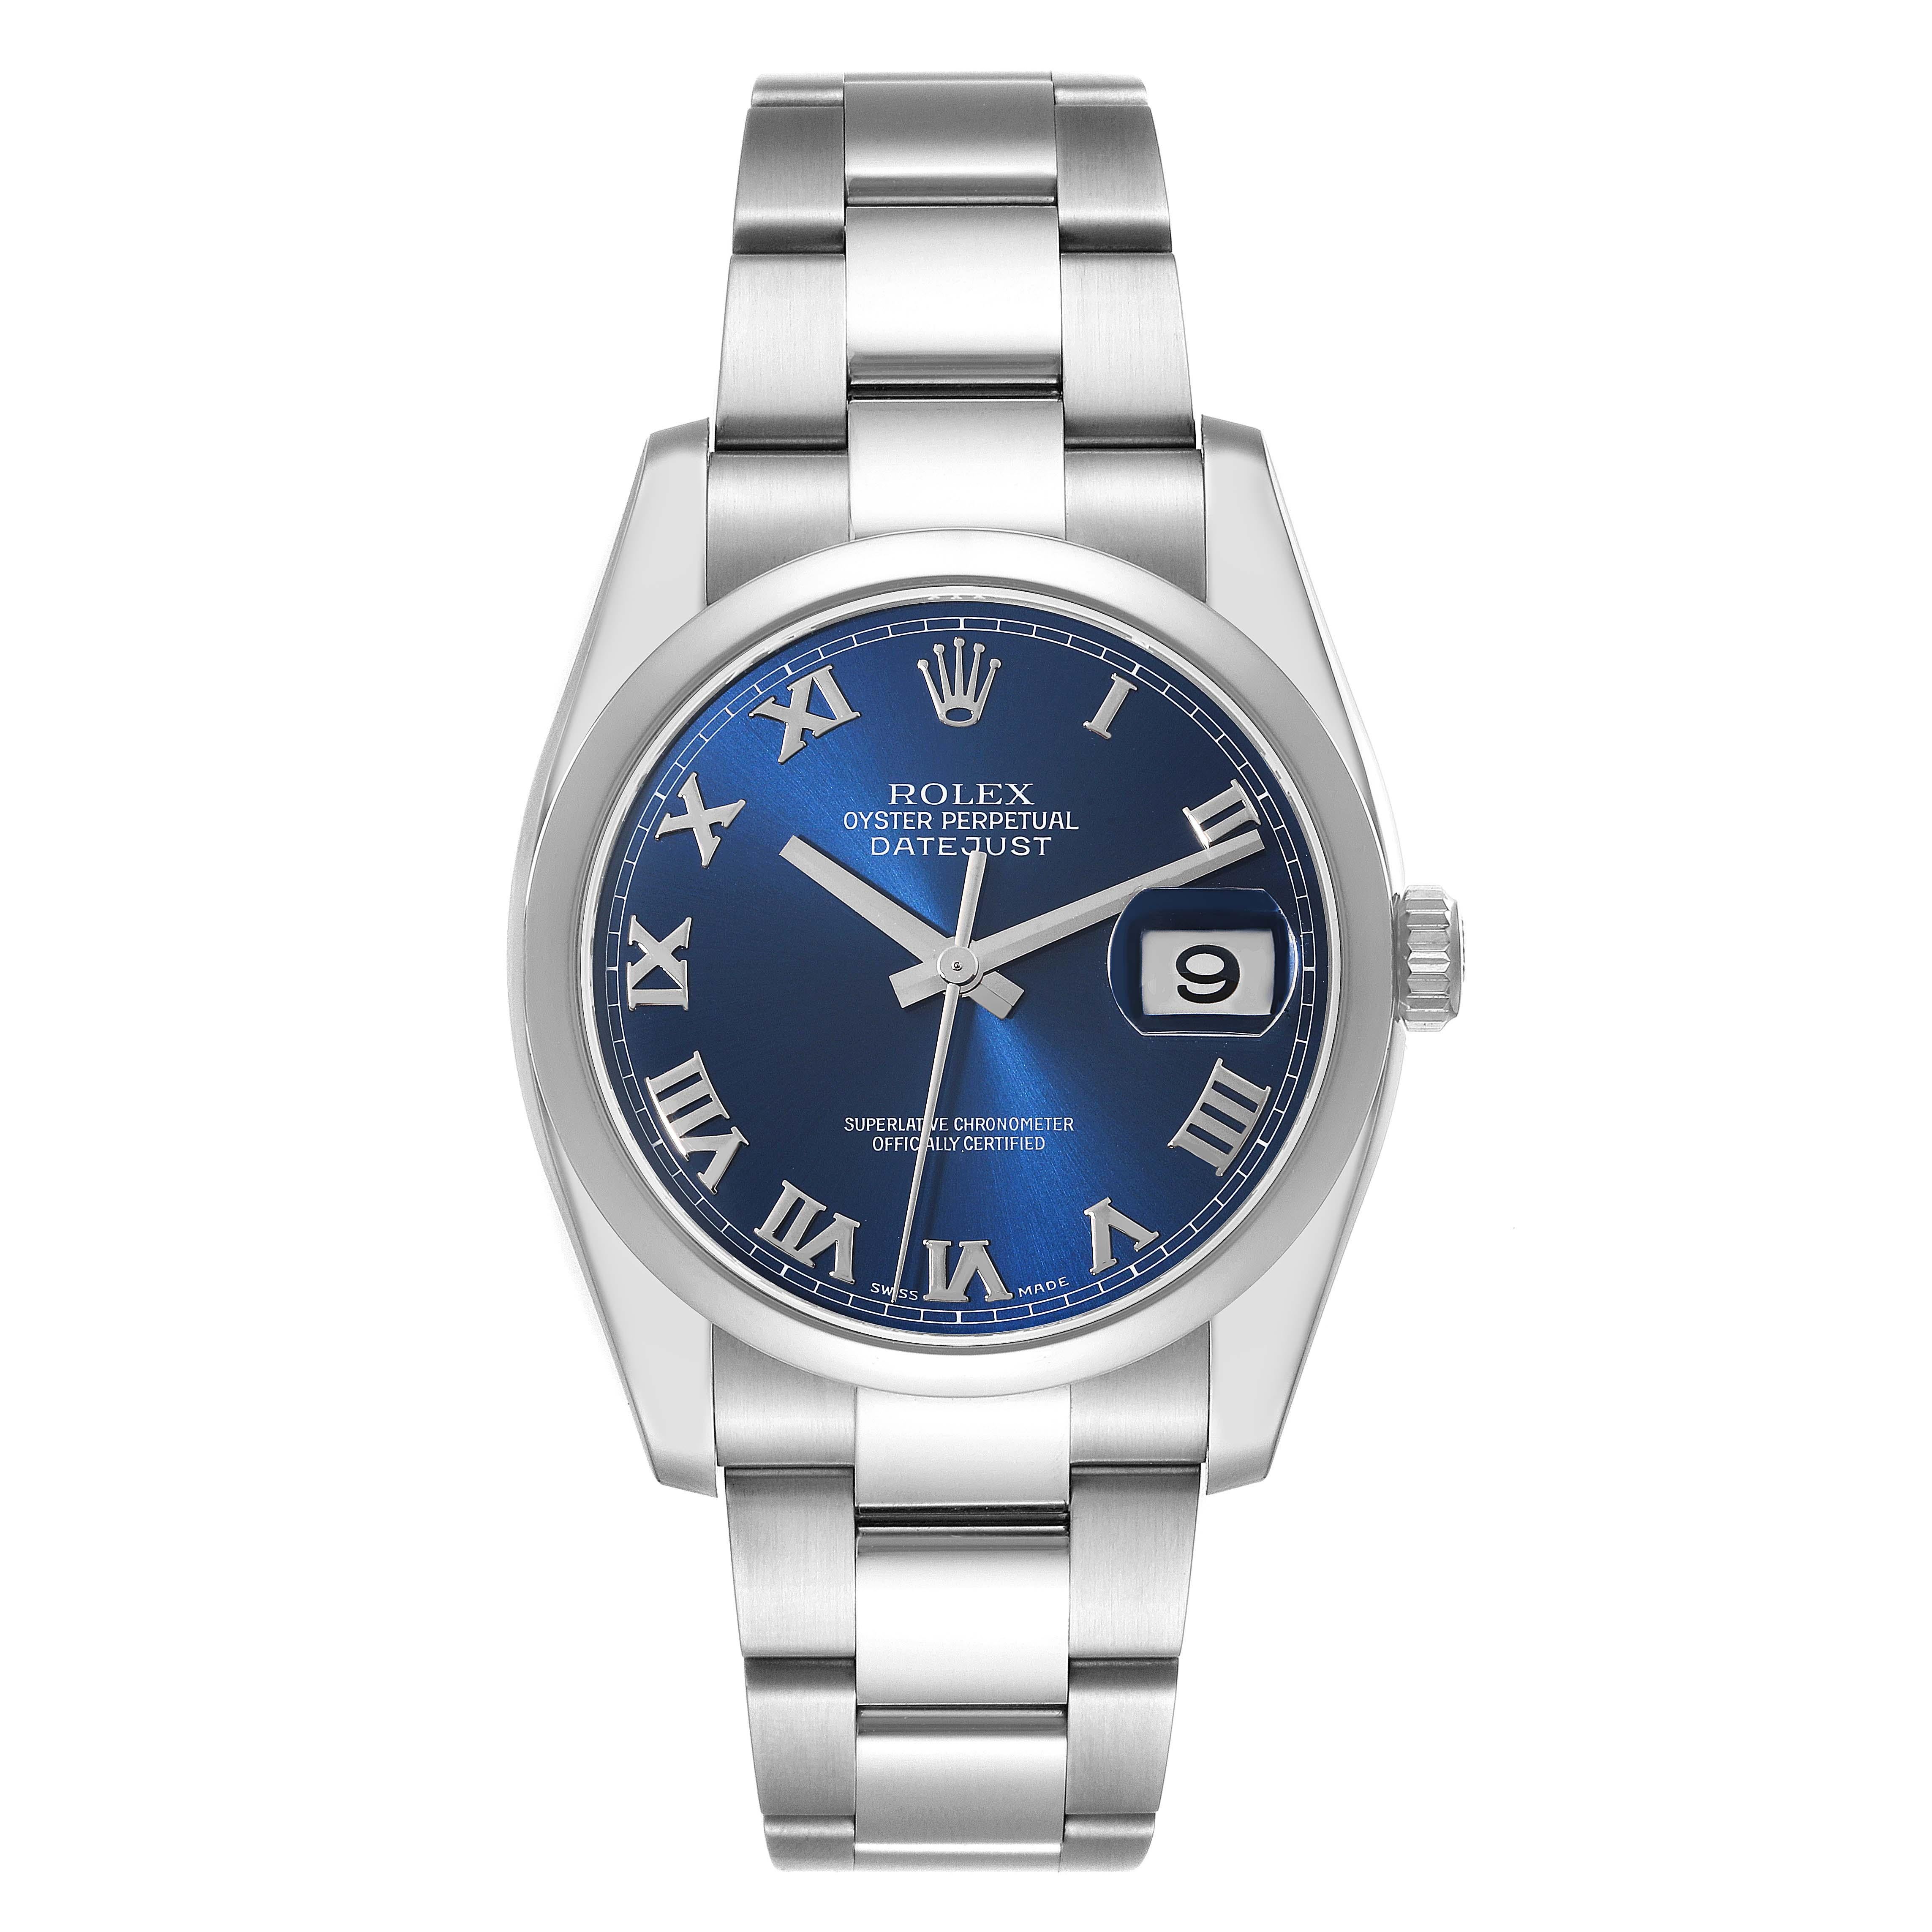 Rolex Datejust Blue Roman Dial Oyster Bracelet Steel Mens Watch 116200. Officially certified chronometer self-winding movement. Stainless steel case 36.0 mm in diameter. Rolex logo on a crown. Stainless steel smooth domed bezel. Scratch resistant